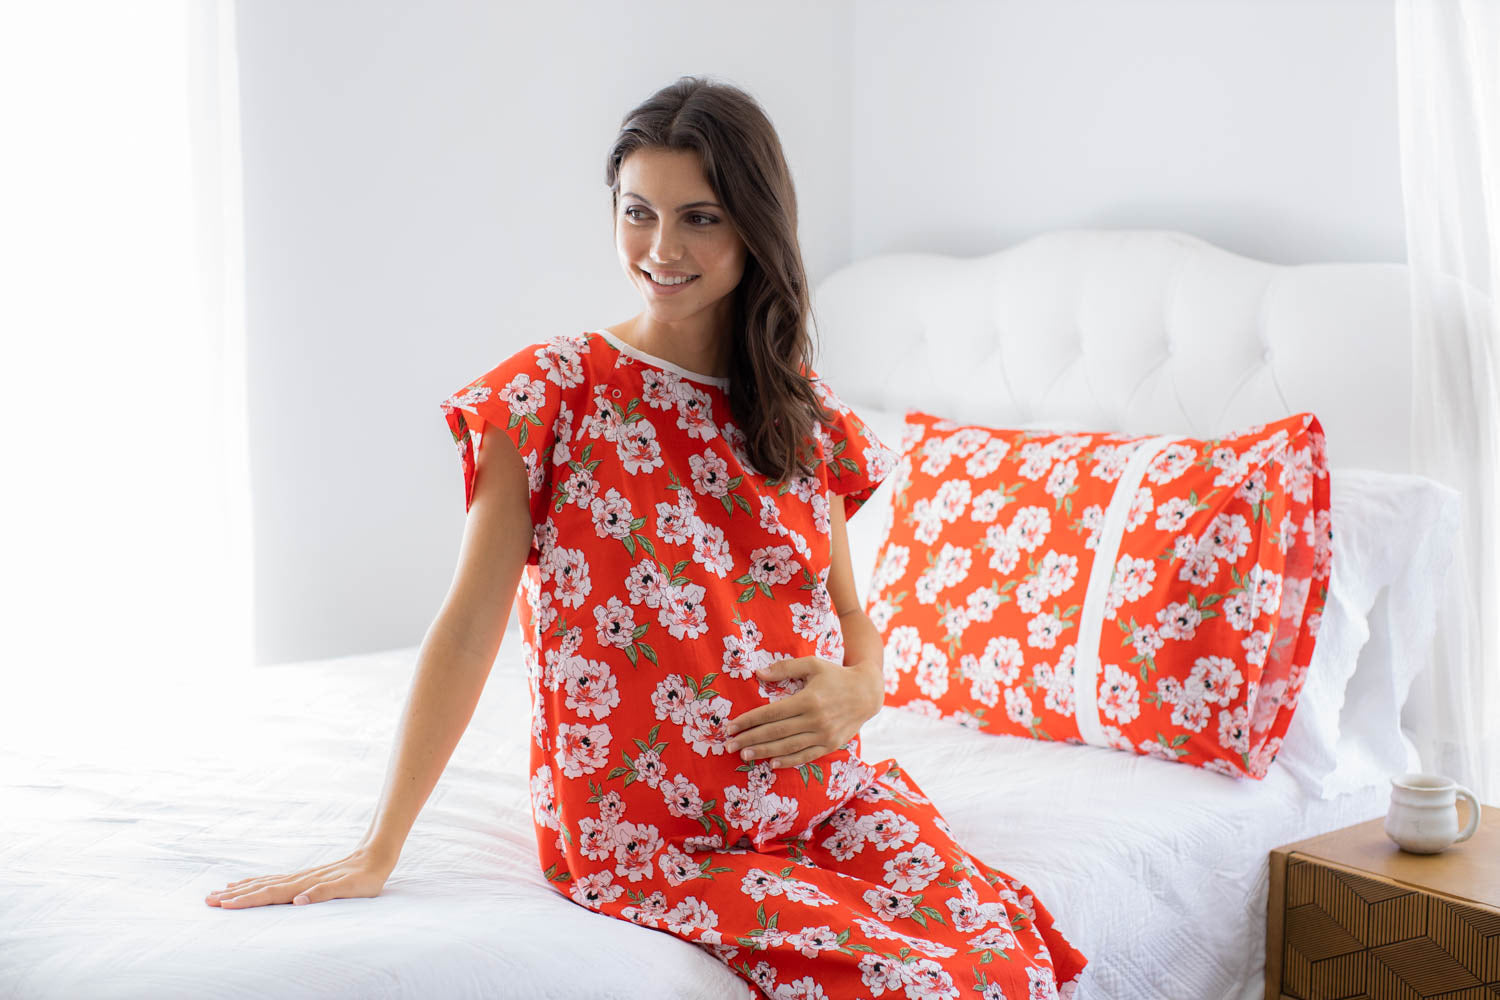 Nicole maternity/nursing nightgown matching Nicole Gownie – Baby Be Mine